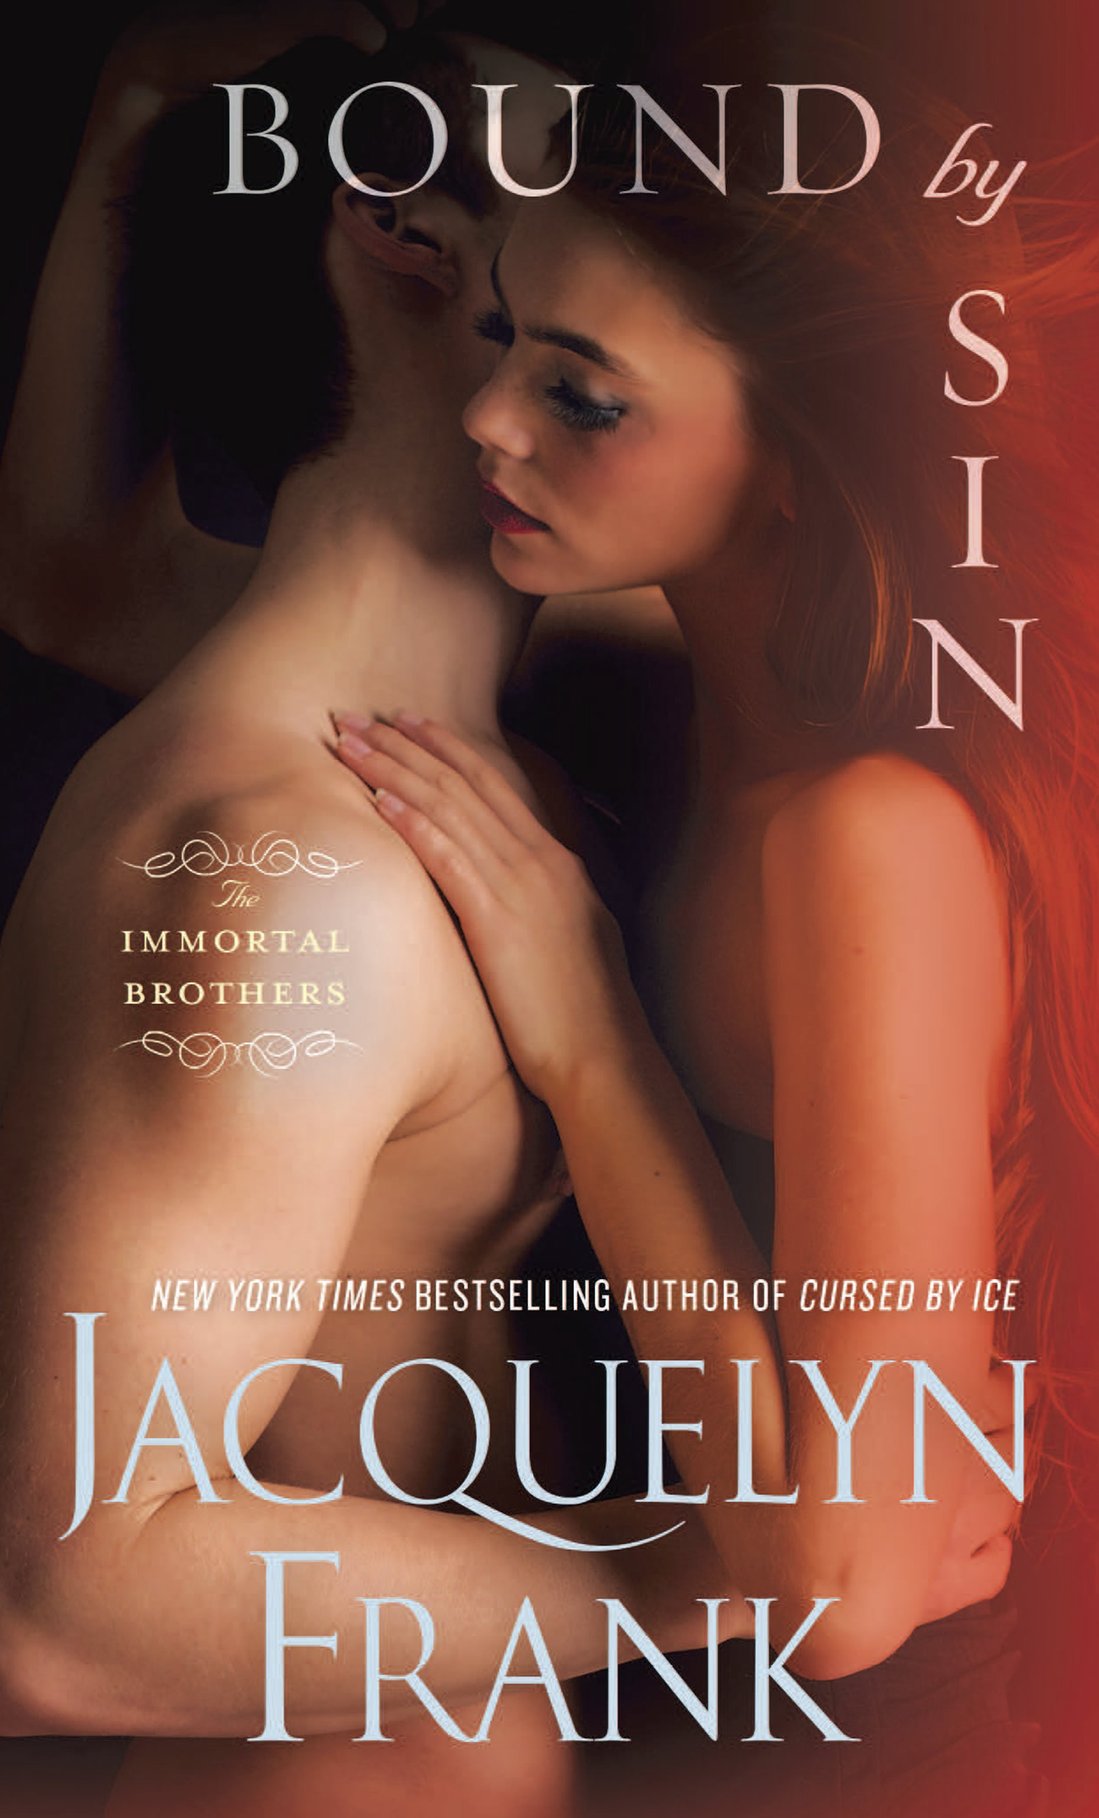 Bound by Sin (2015) by Jacquelyn Frank